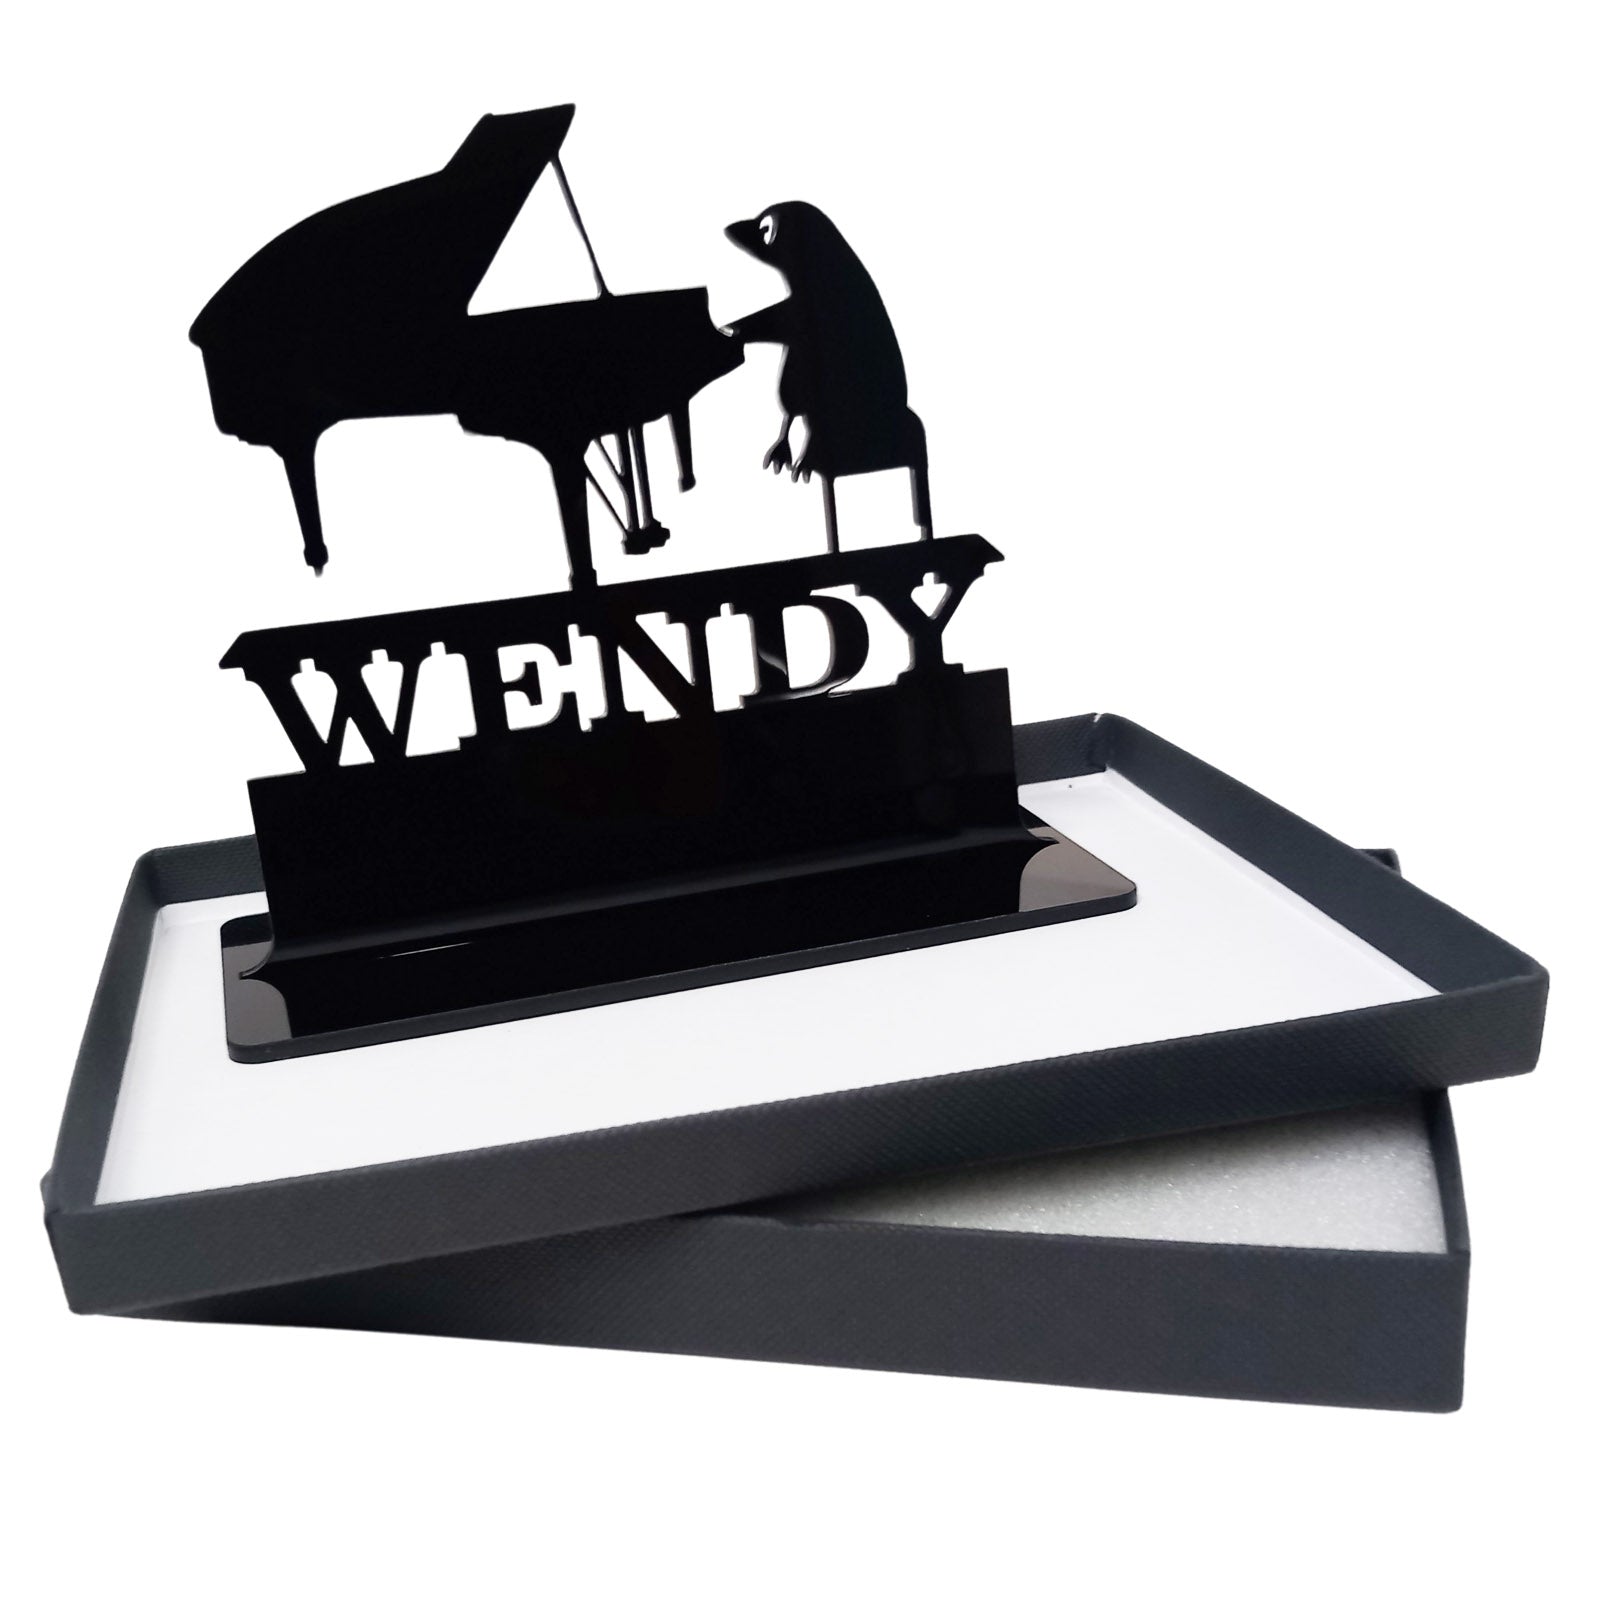 Acrylic personalised music themed funny gifts for pianists. Standalone keepsake ornaments.